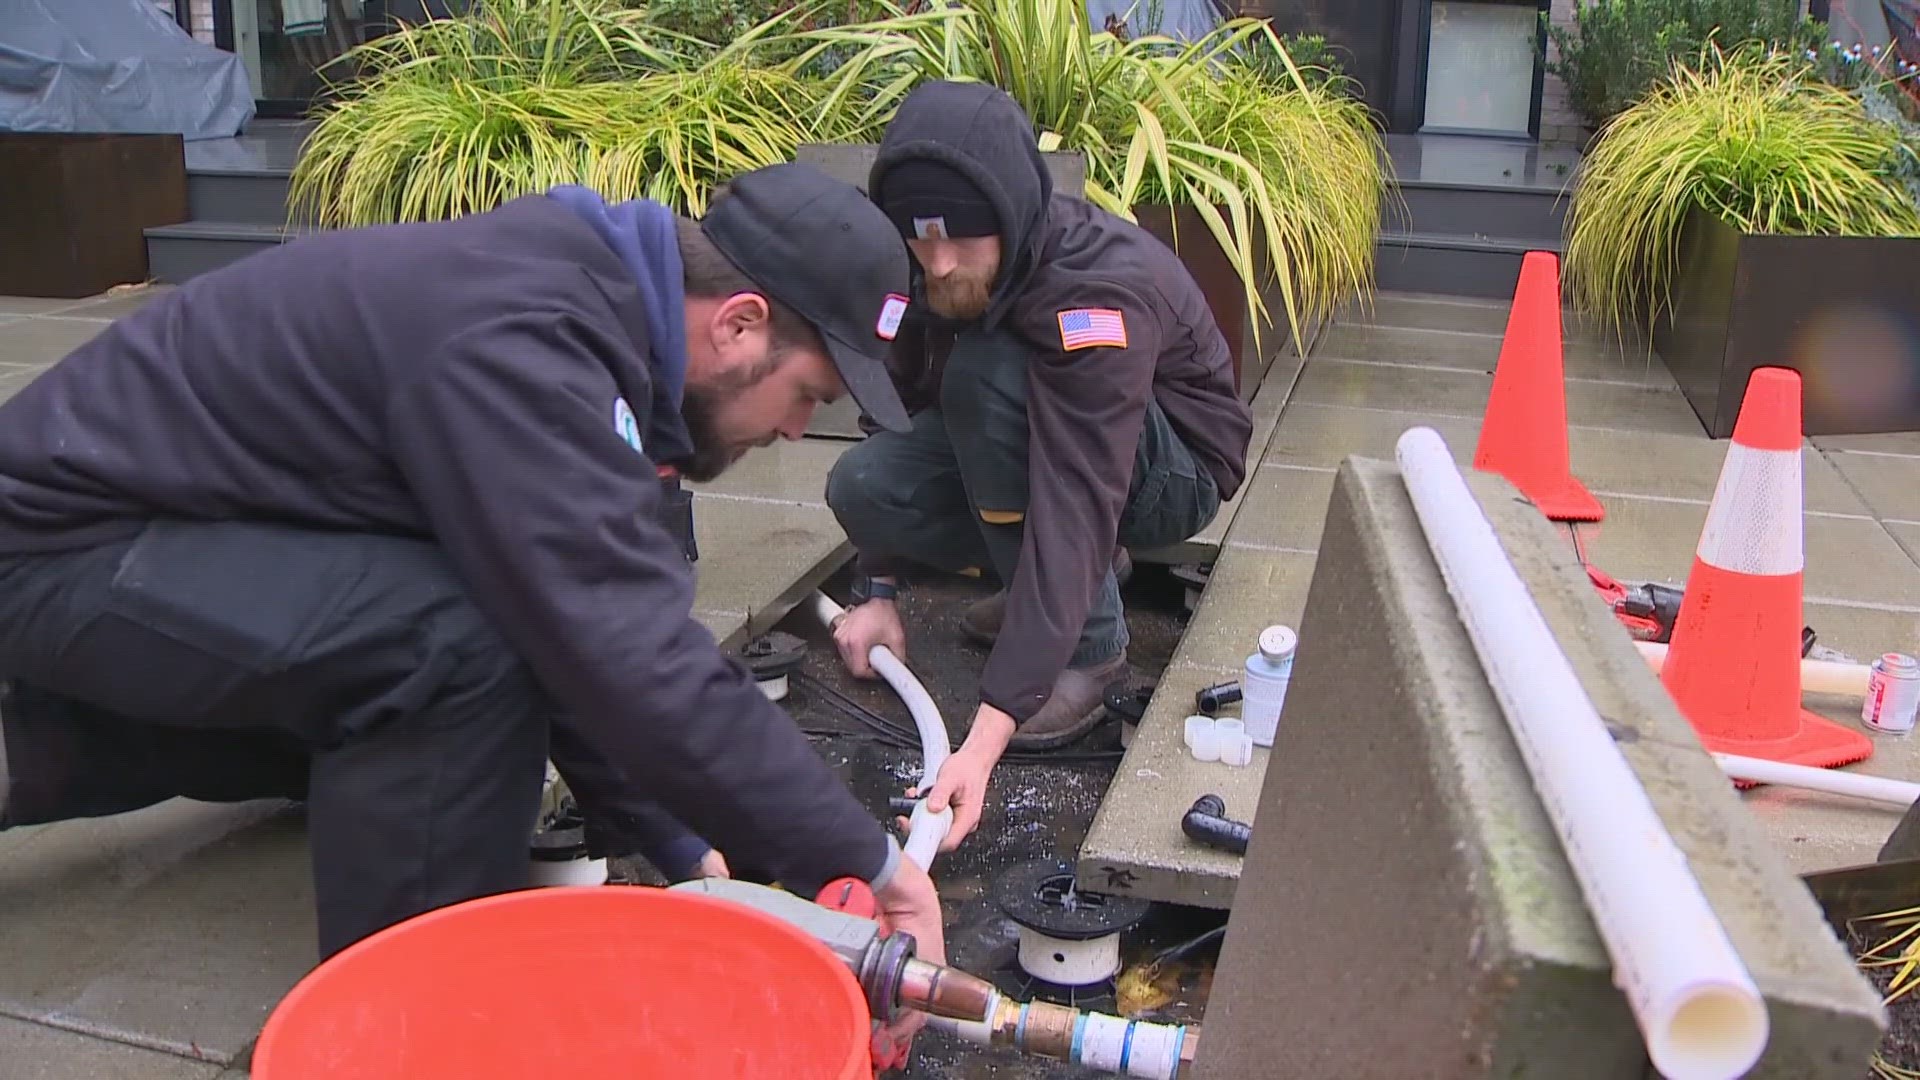 Both customers and plumbing companies are struggling to keep up with the demand as frigid weather leads to hundreds of burst pipes in the Seattle area.